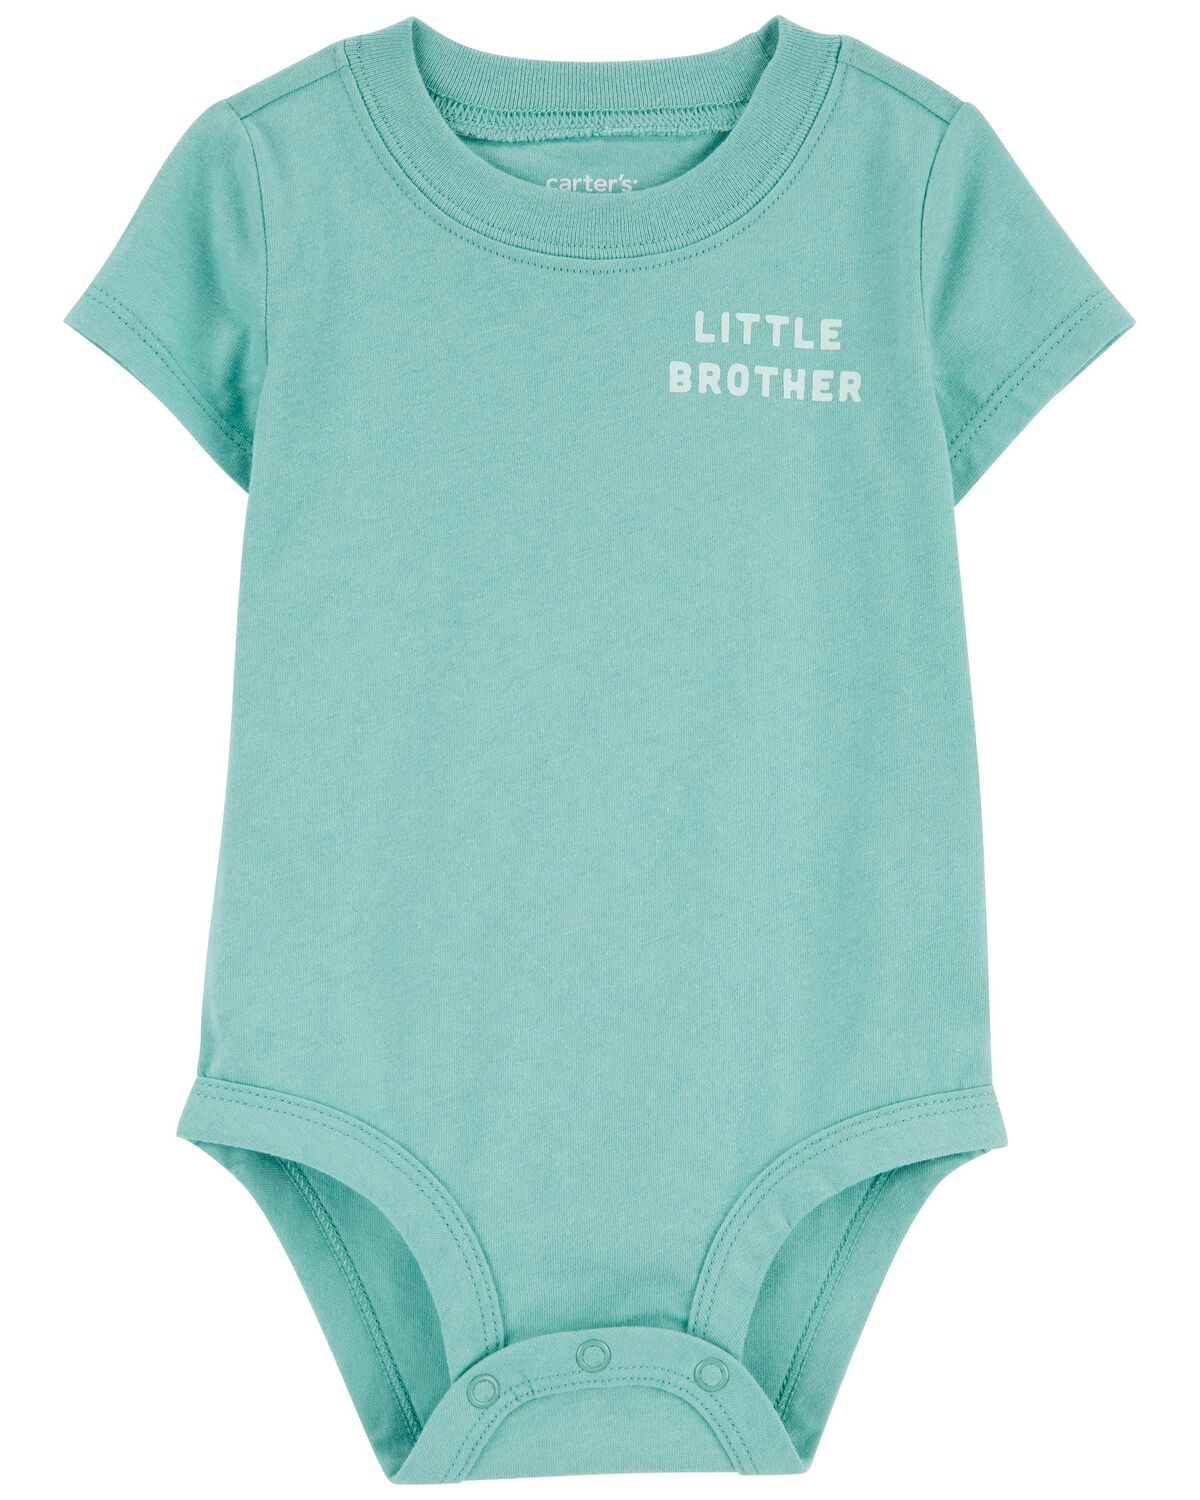 Green Baby Little Brother Cotton Bodysuit | carters.com